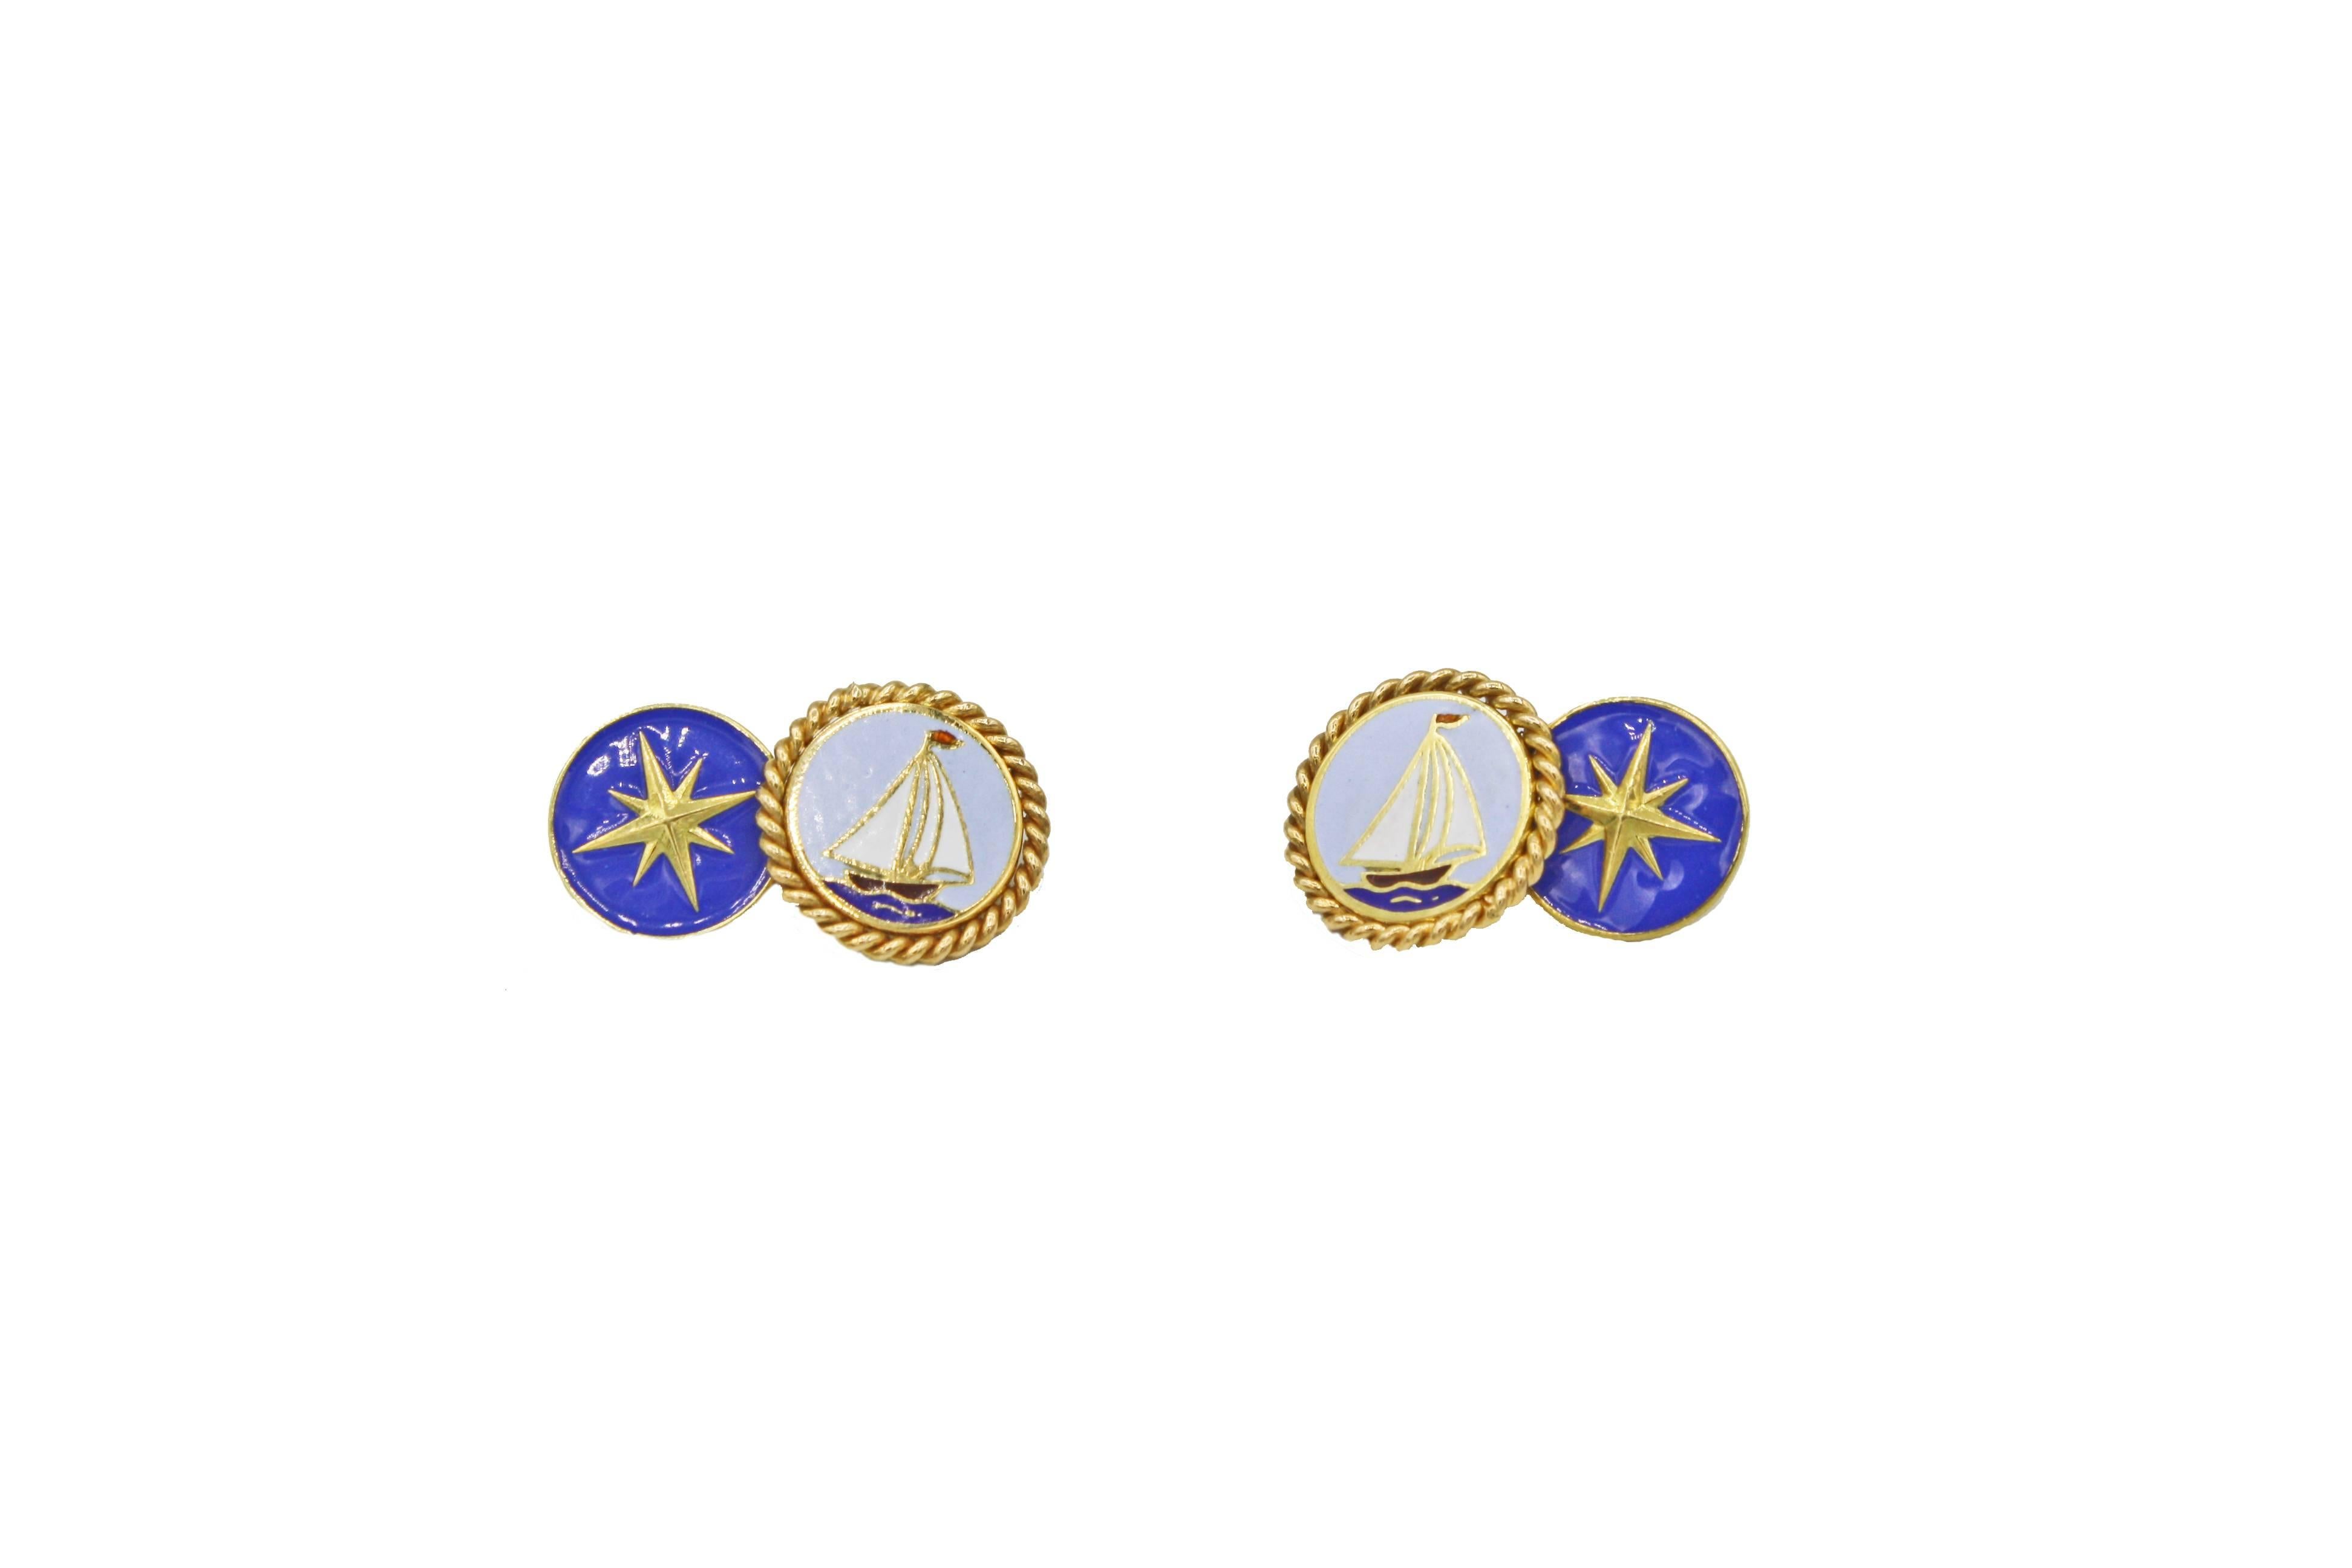 Elegant enamel and 18K yellow gold nautical cufflink and stud set by Renato Cipullo. It features rich blue compass rose and sailboats with gold rope detail. Beautifully made and easy to wear. 